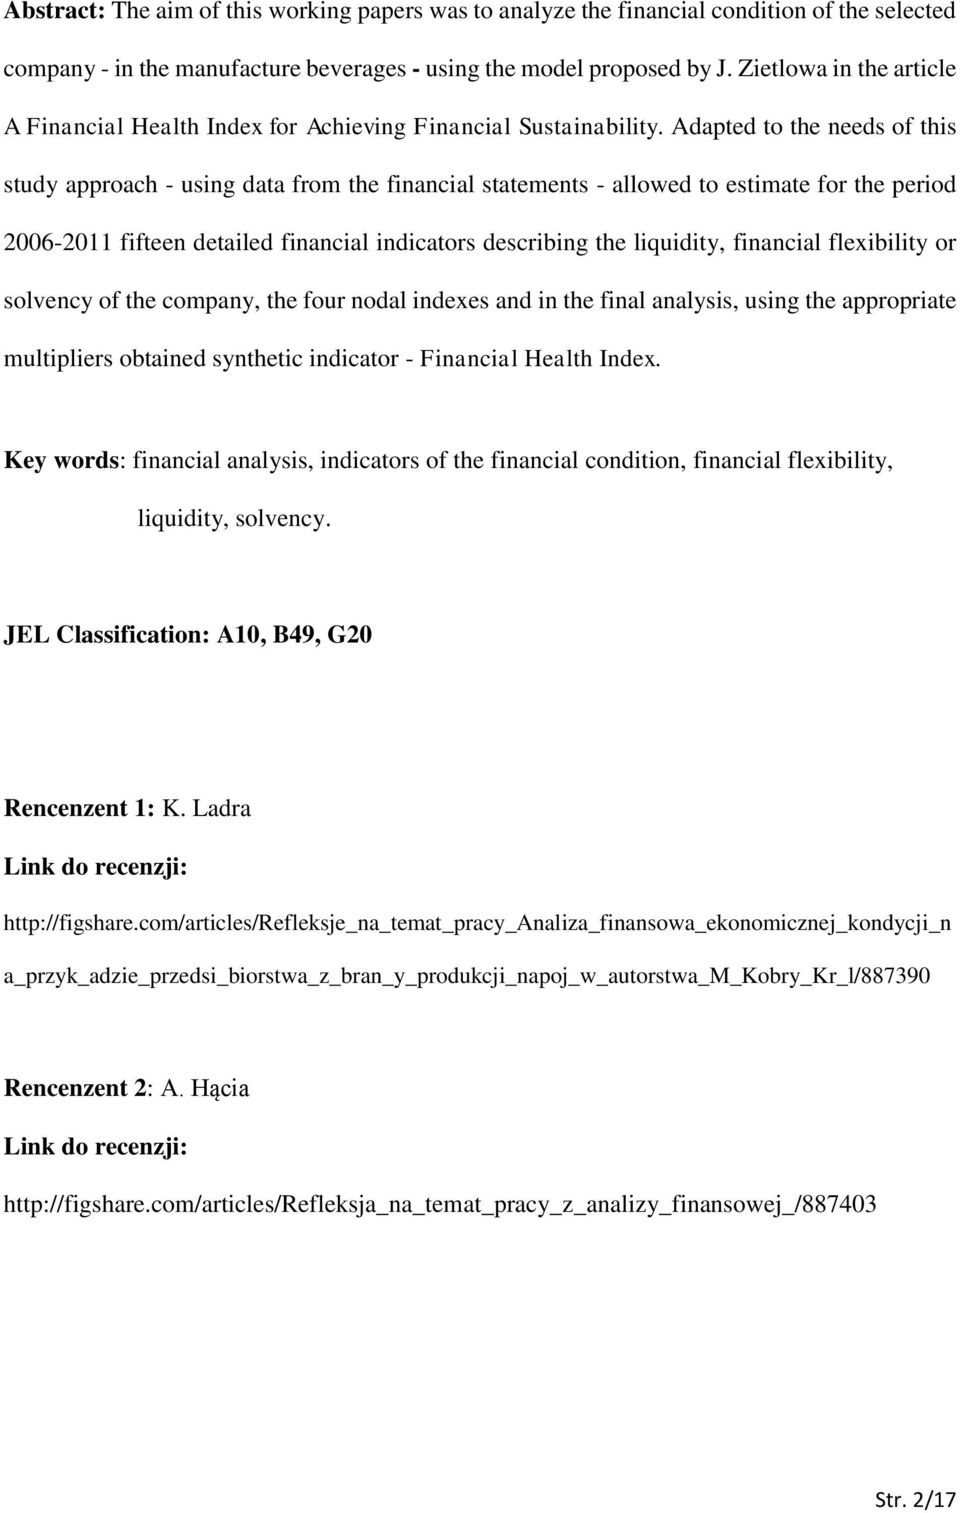 Adapted to the needs of this study approach - using data from the financial statements - allowed to estimate for the period 2006-2011 fifteen detailed financial indicators describing the liquidity,